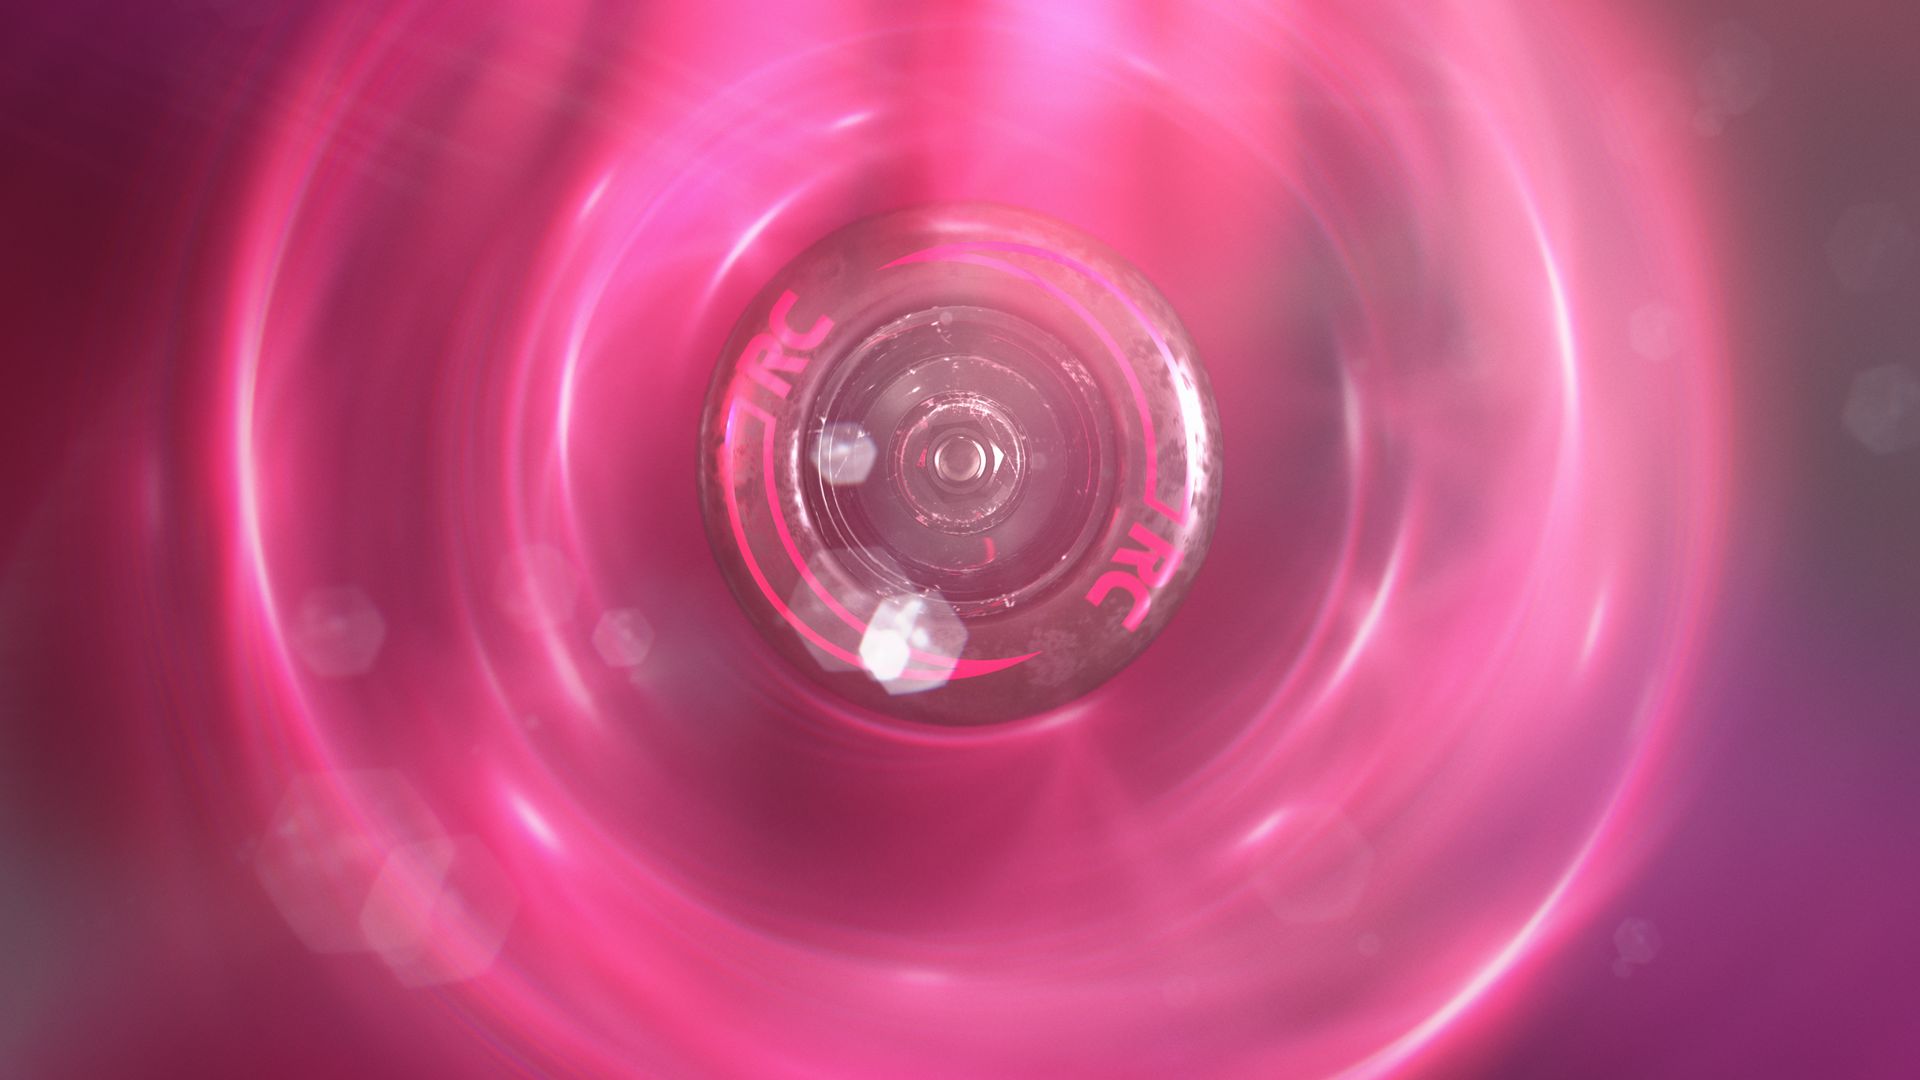 skate wheel rendered in 3D and lensflares for the Roller Champions logo animation